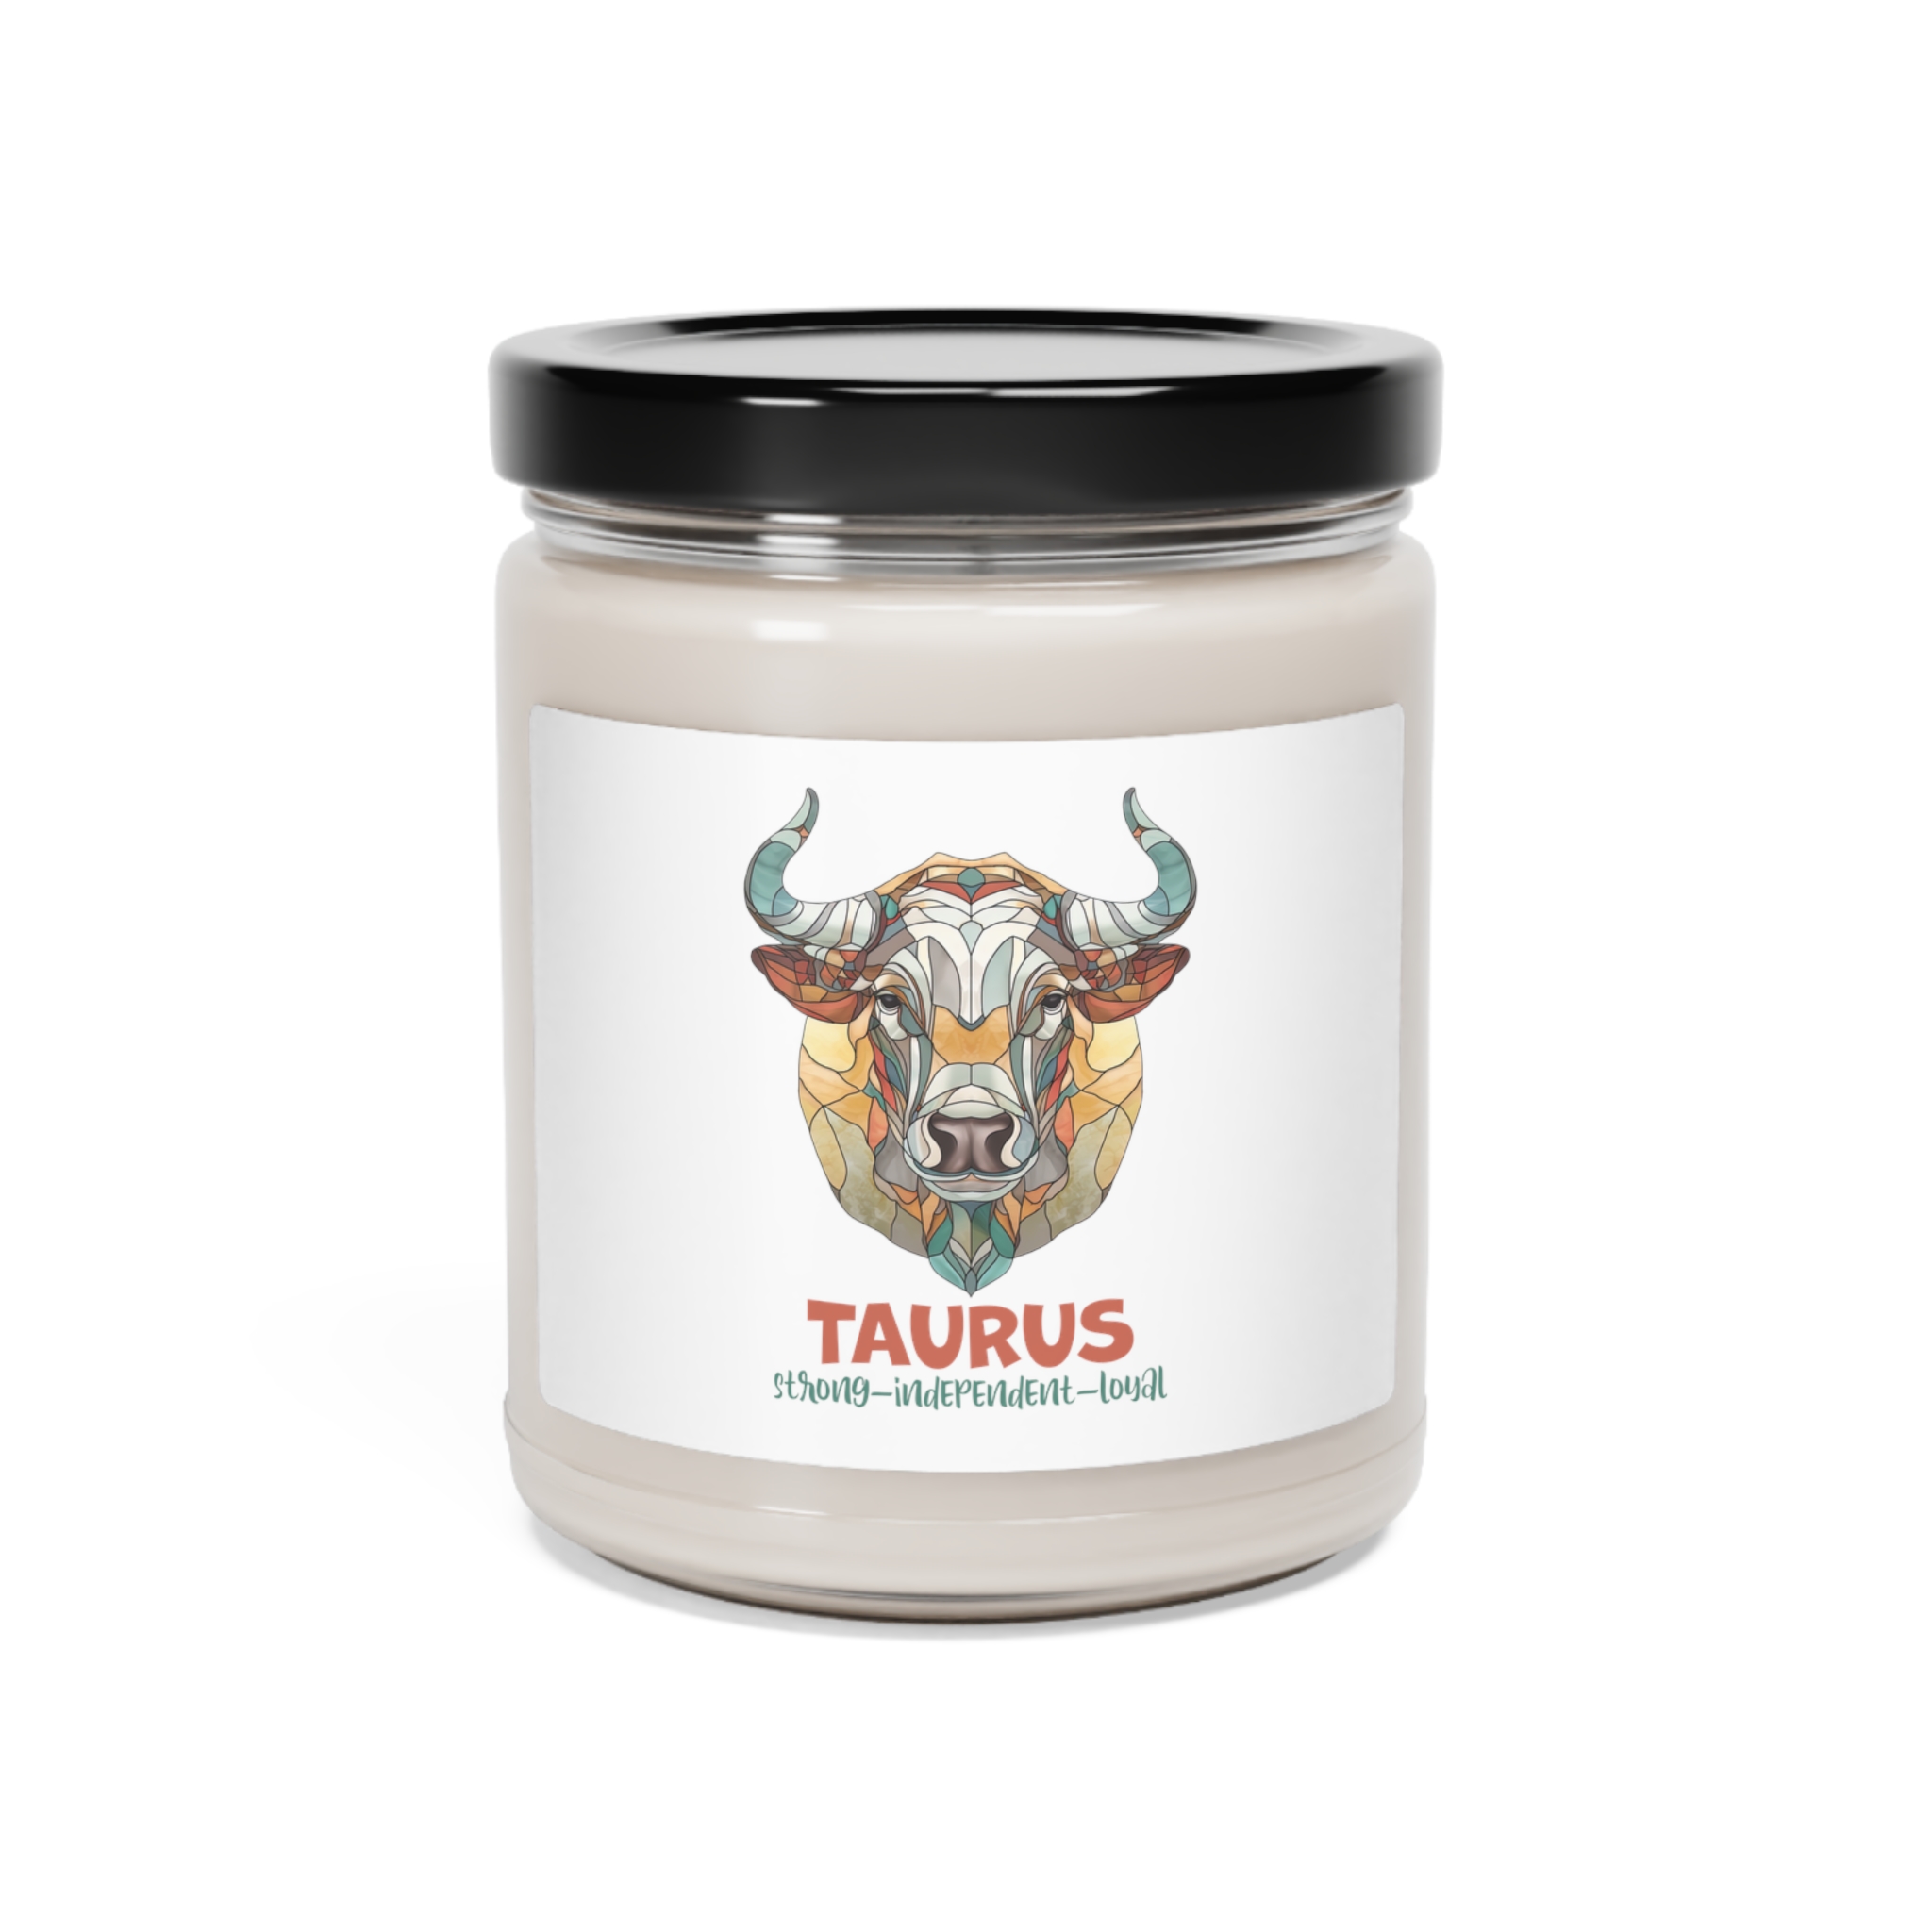 TAU-CAN-02 – Taurus Strong Independent Loyal Birthday By Heegifts (2)